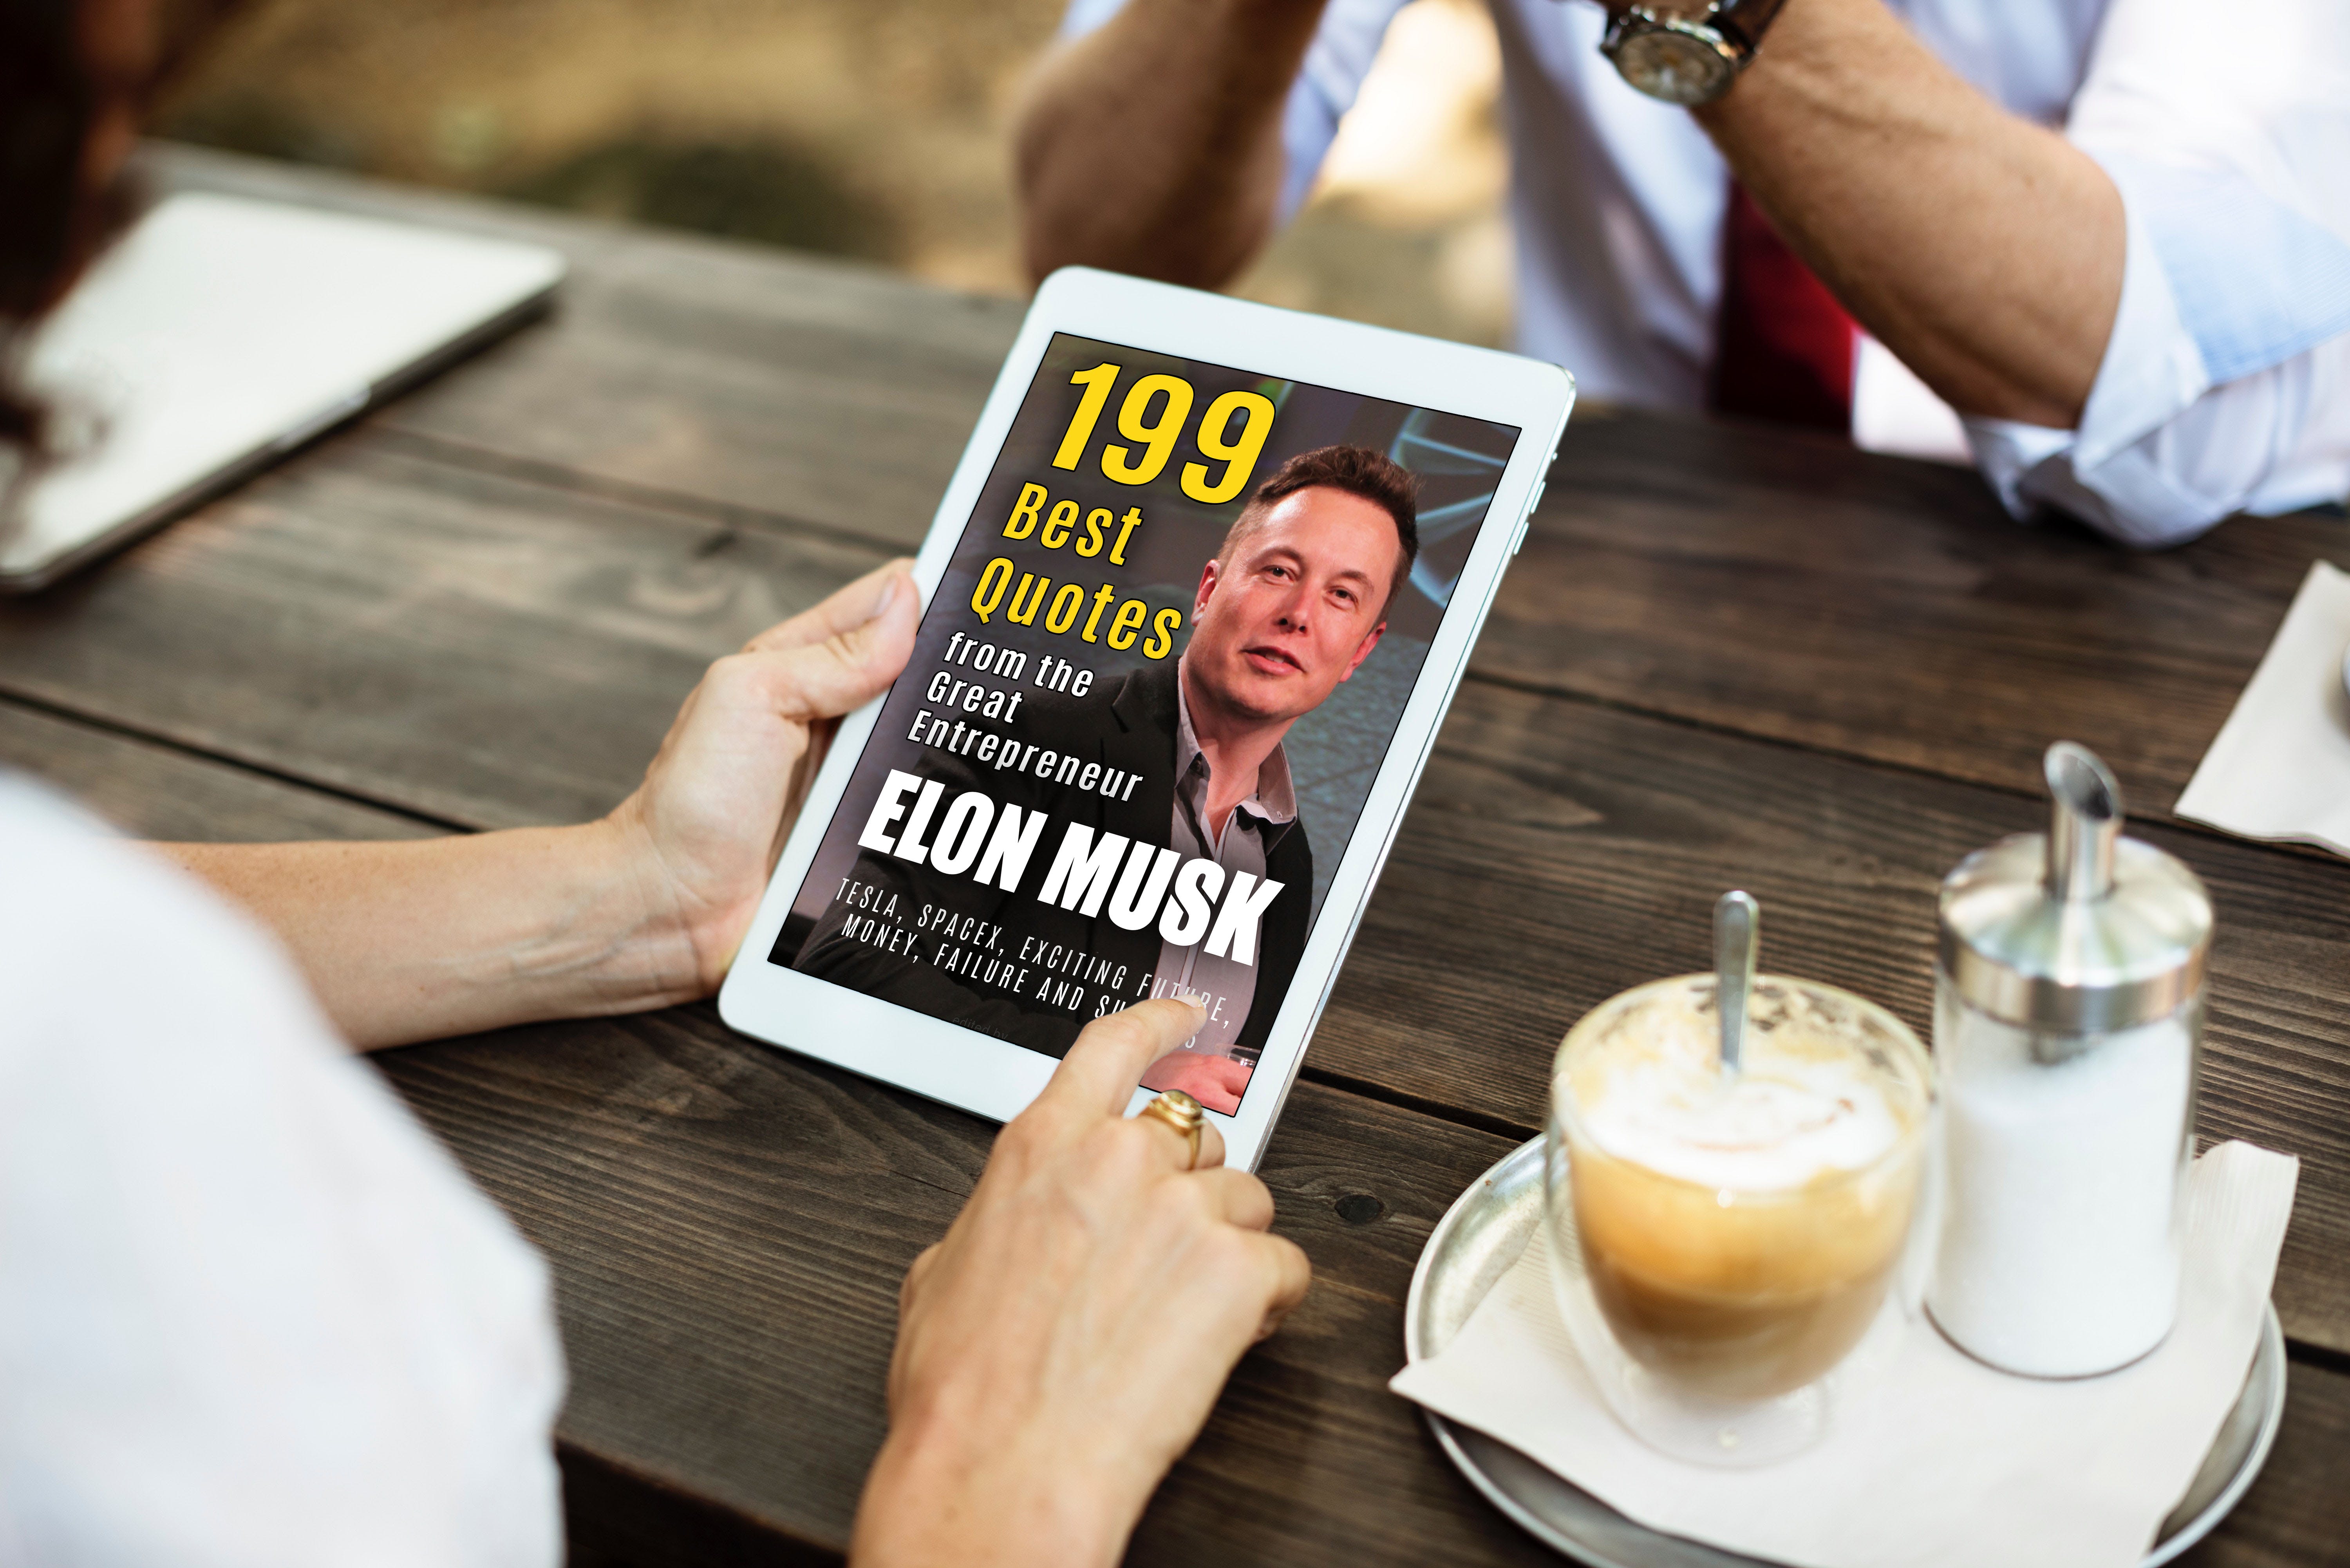 Elon Musk: 199 Best Quotes from the Great Entrepreneur media 3